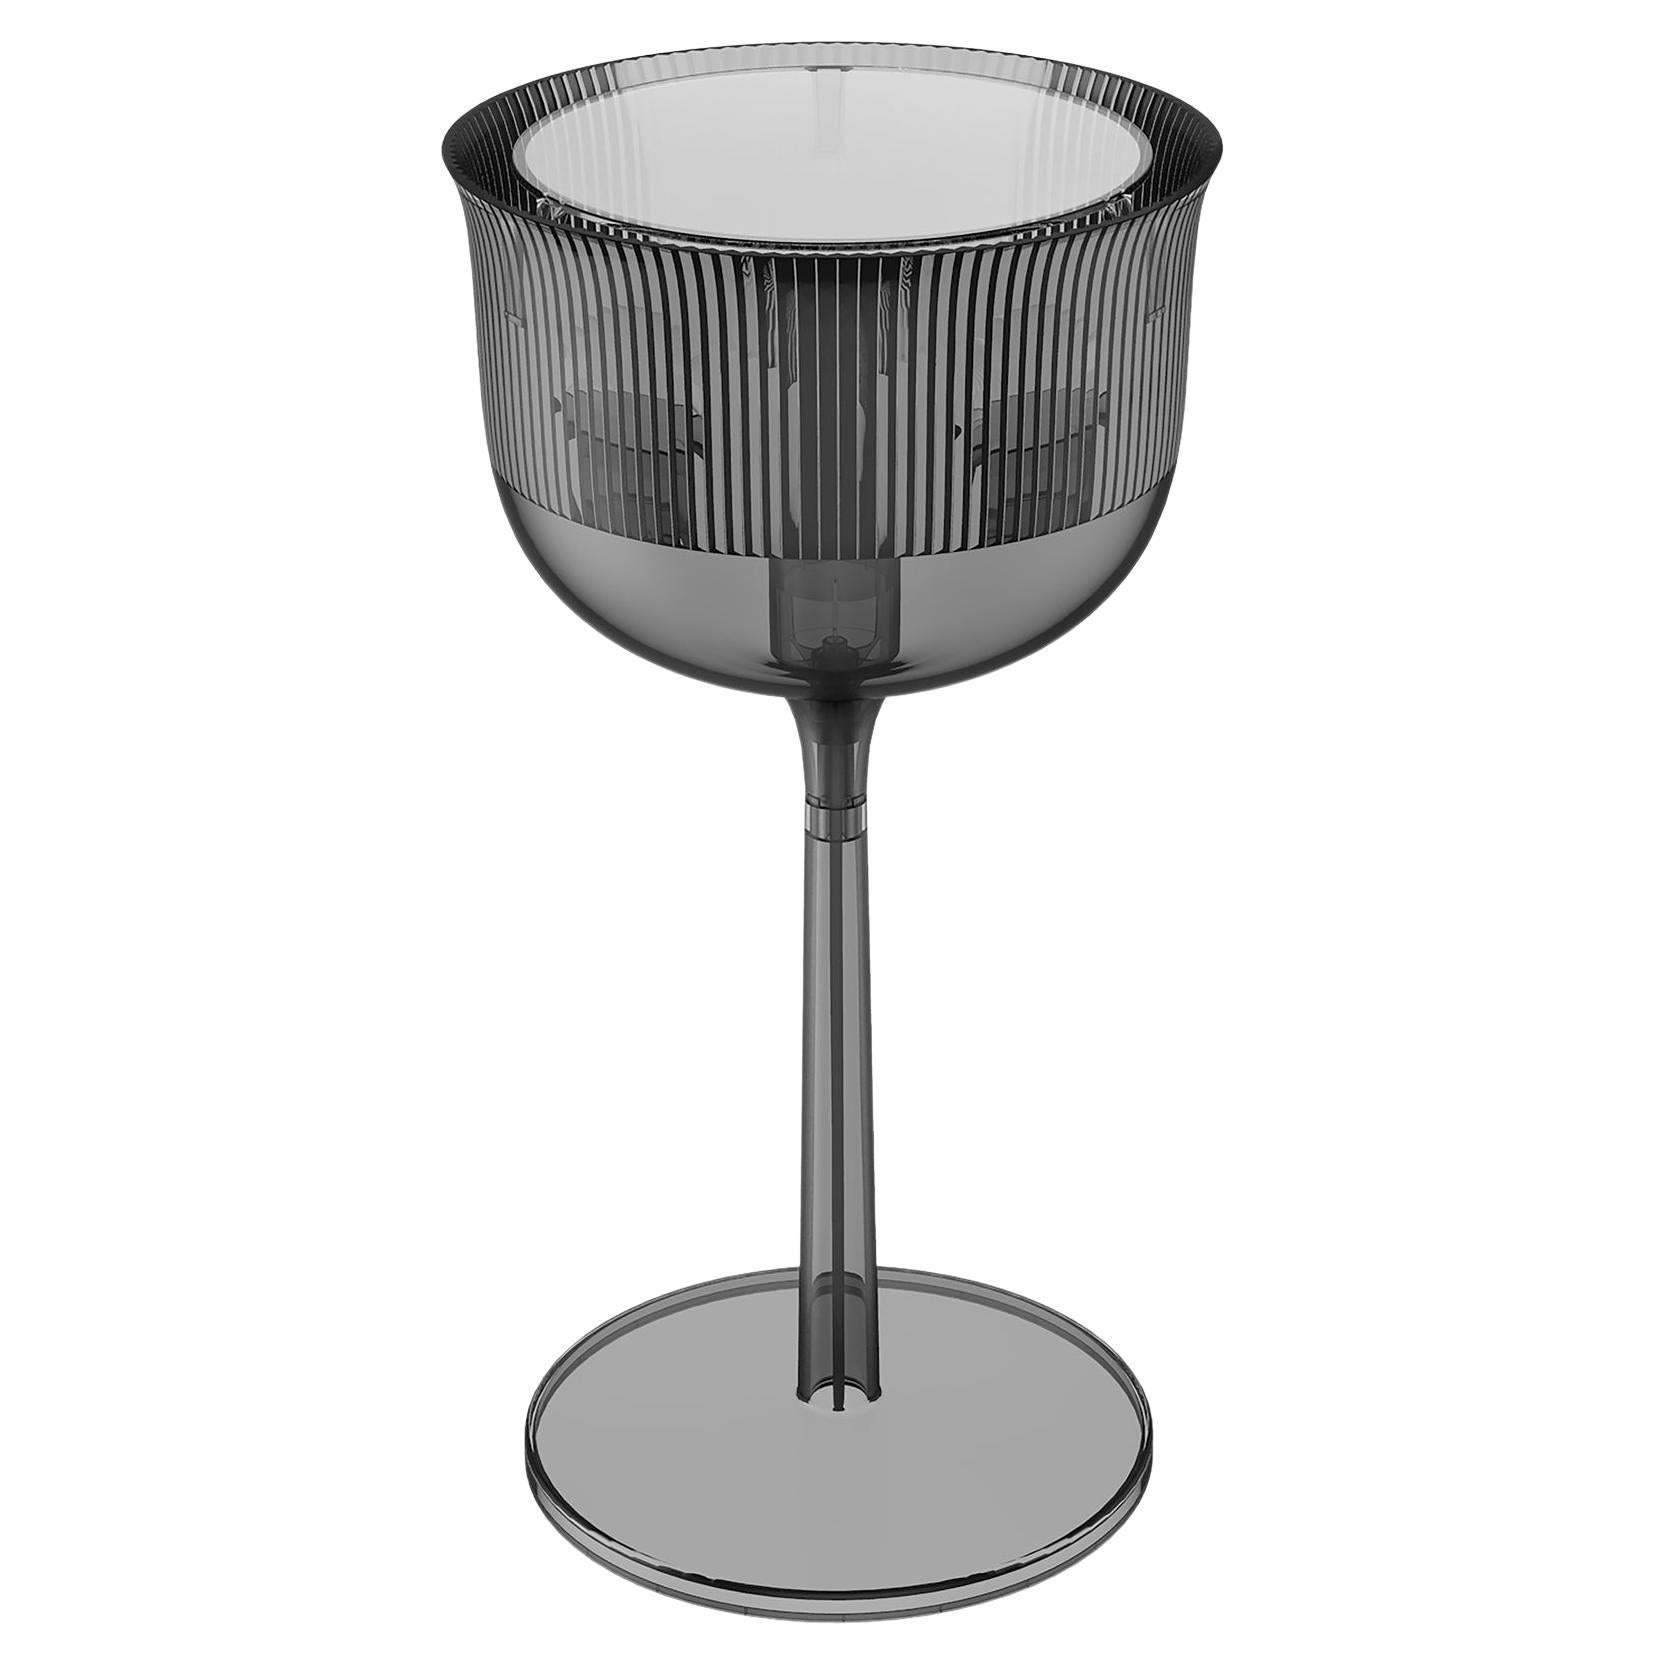 Goblet Table Lamp Medium Fume, Designed by Stefano Giovannoni, Made in Italy